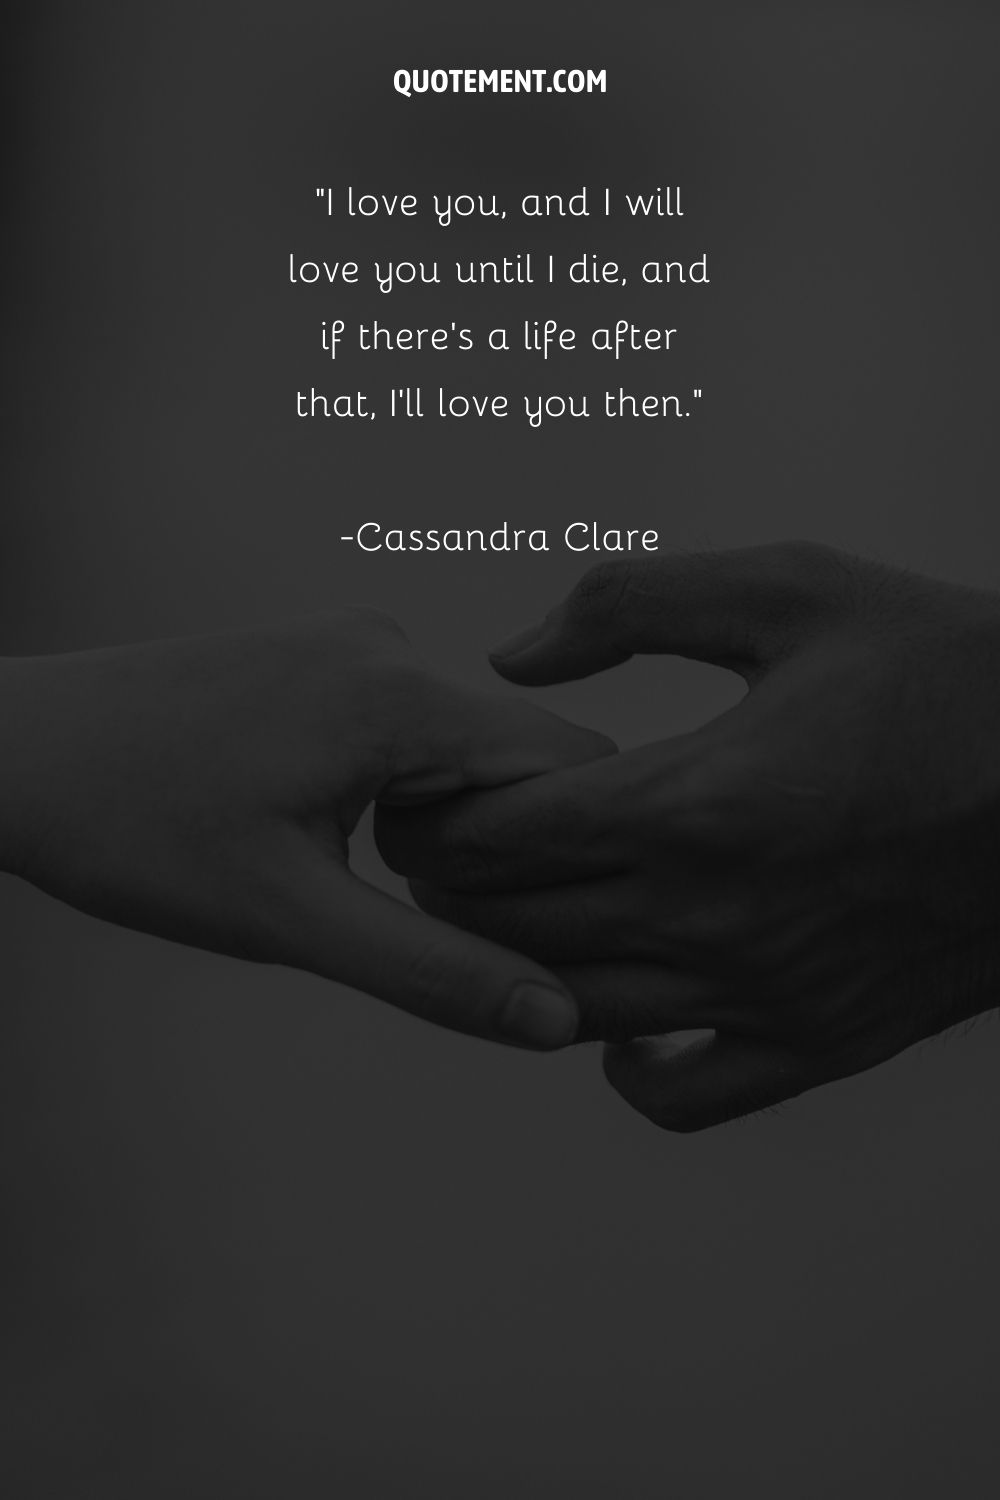 Image of gently clasped hands representing a romantic love quote
